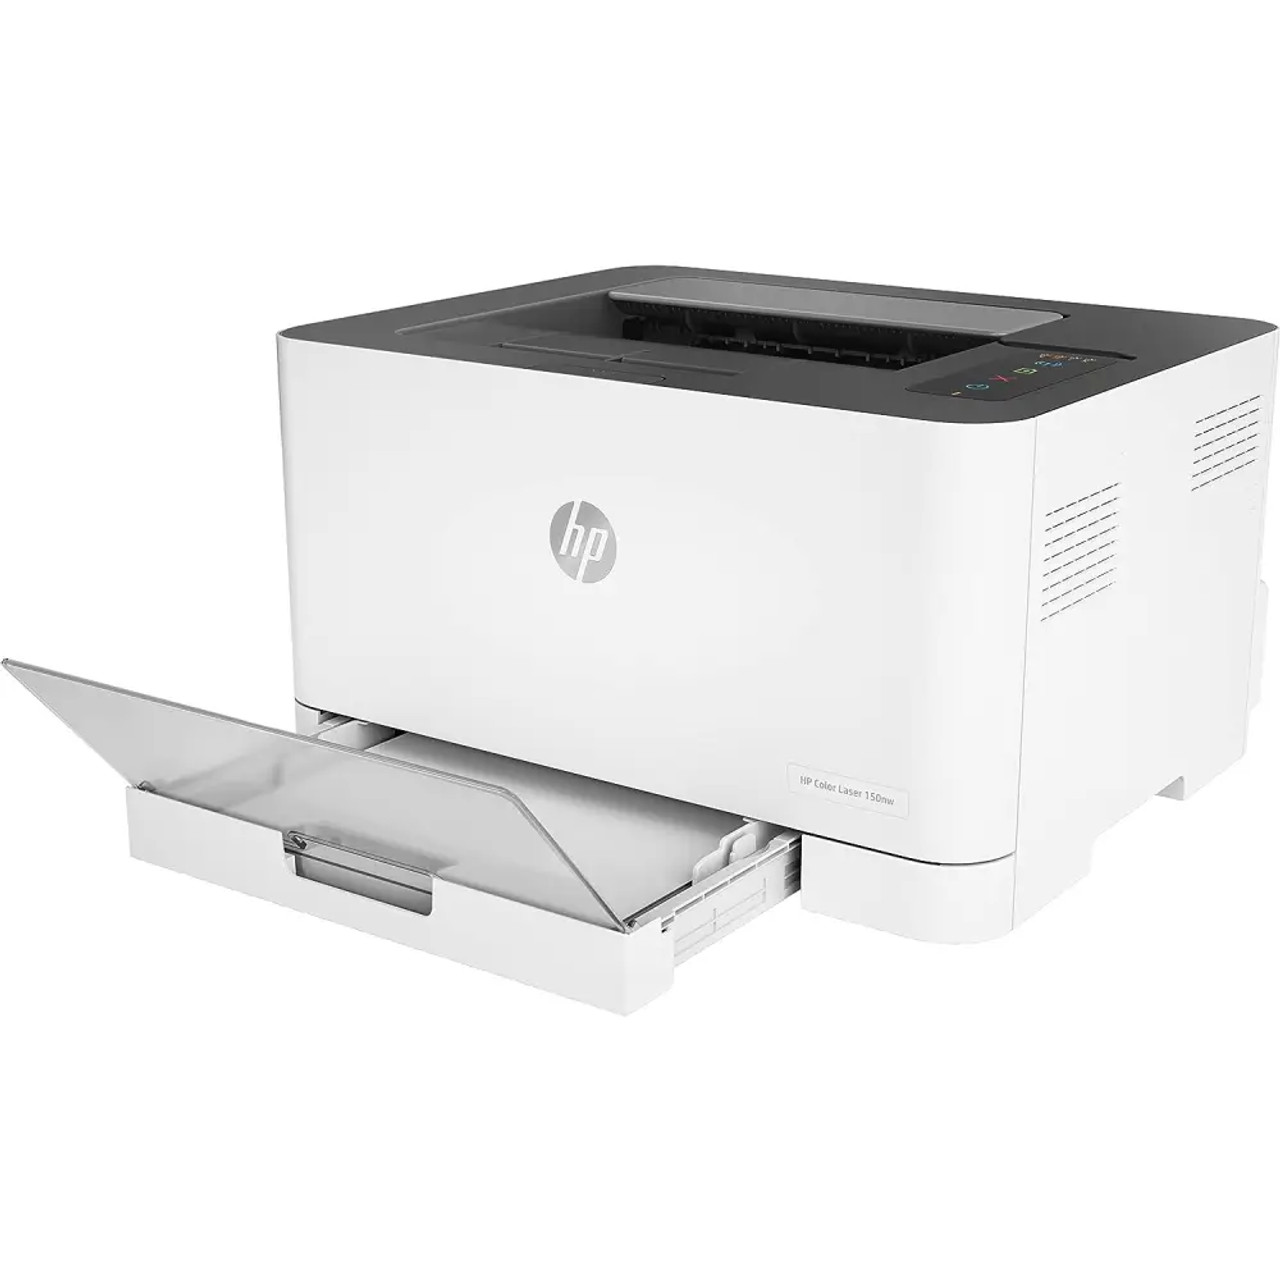 HP Color Laser 150nw (2 stores) see best prices now »